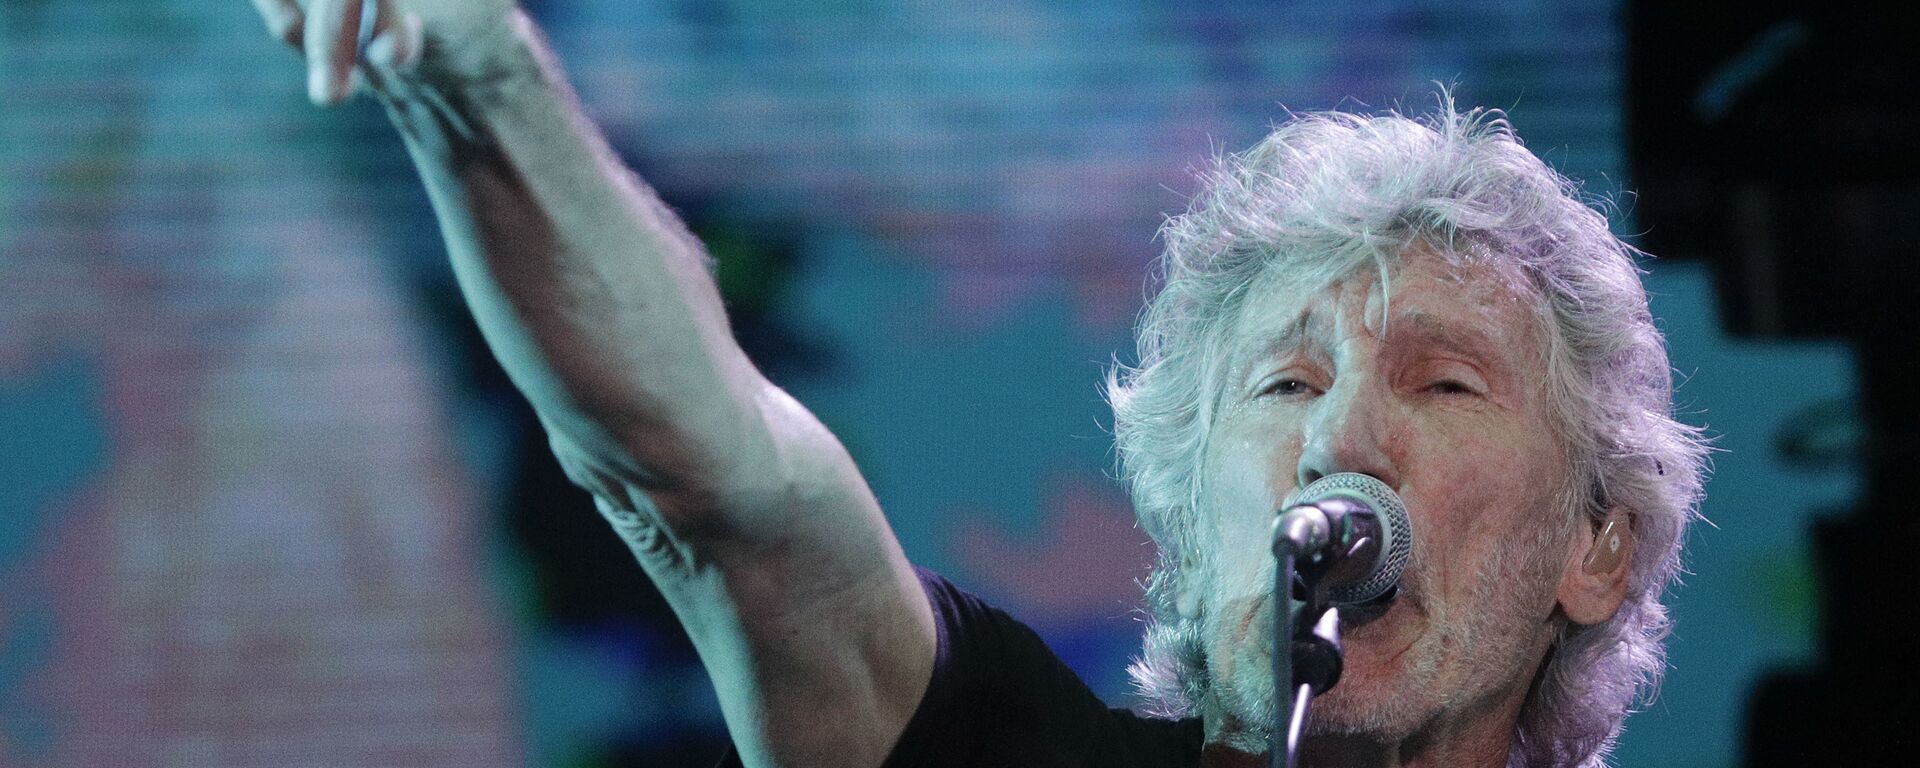 Former member of Pink Floyd, British singer and songwriter Roger Waters performs during his concert of the Us+Them tour in Rome's Circus Maximus, Saturday, July 14, 2018 - Sputnik Türkiye, 1920, 04.03.2019